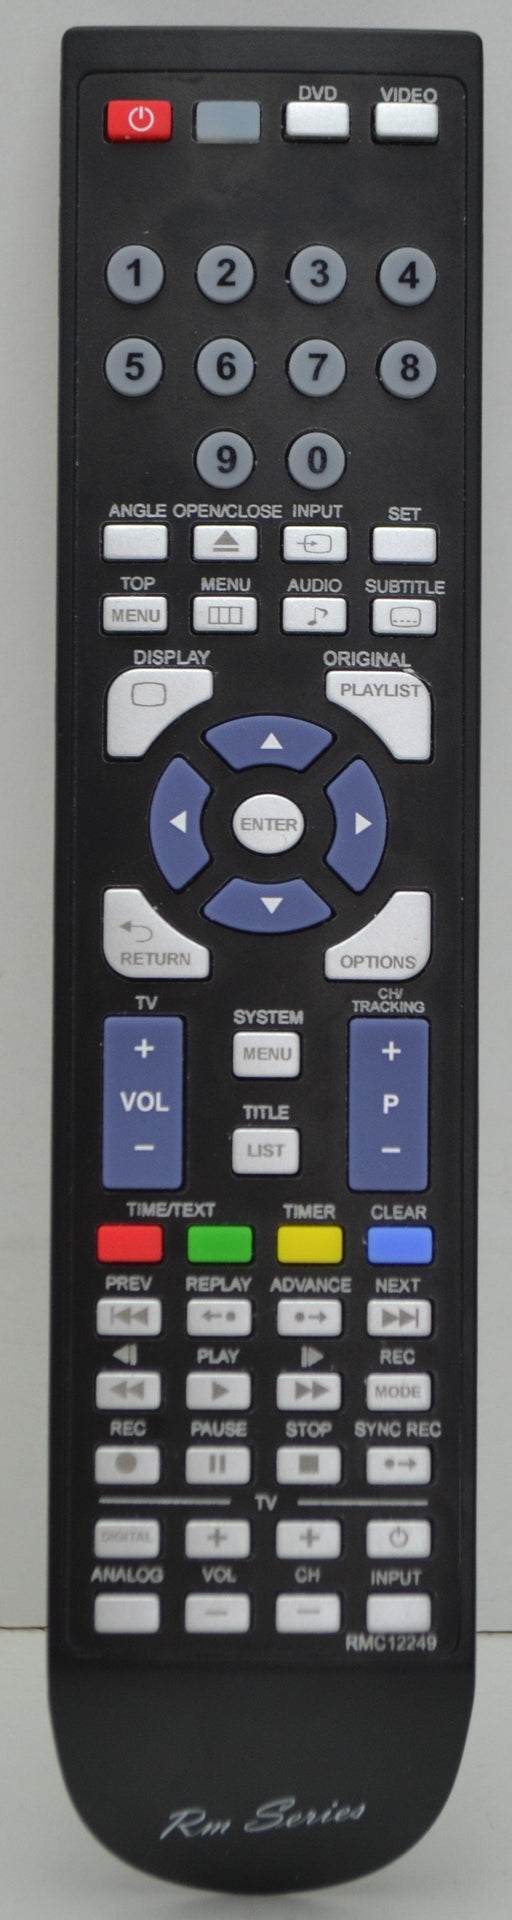 Sony Anderic RM Series RMC12249 RMT-D240A DVD VCR Combo Player Replacement Remote Control-Remote-SpenCertified-refurbished-vintage-electonics